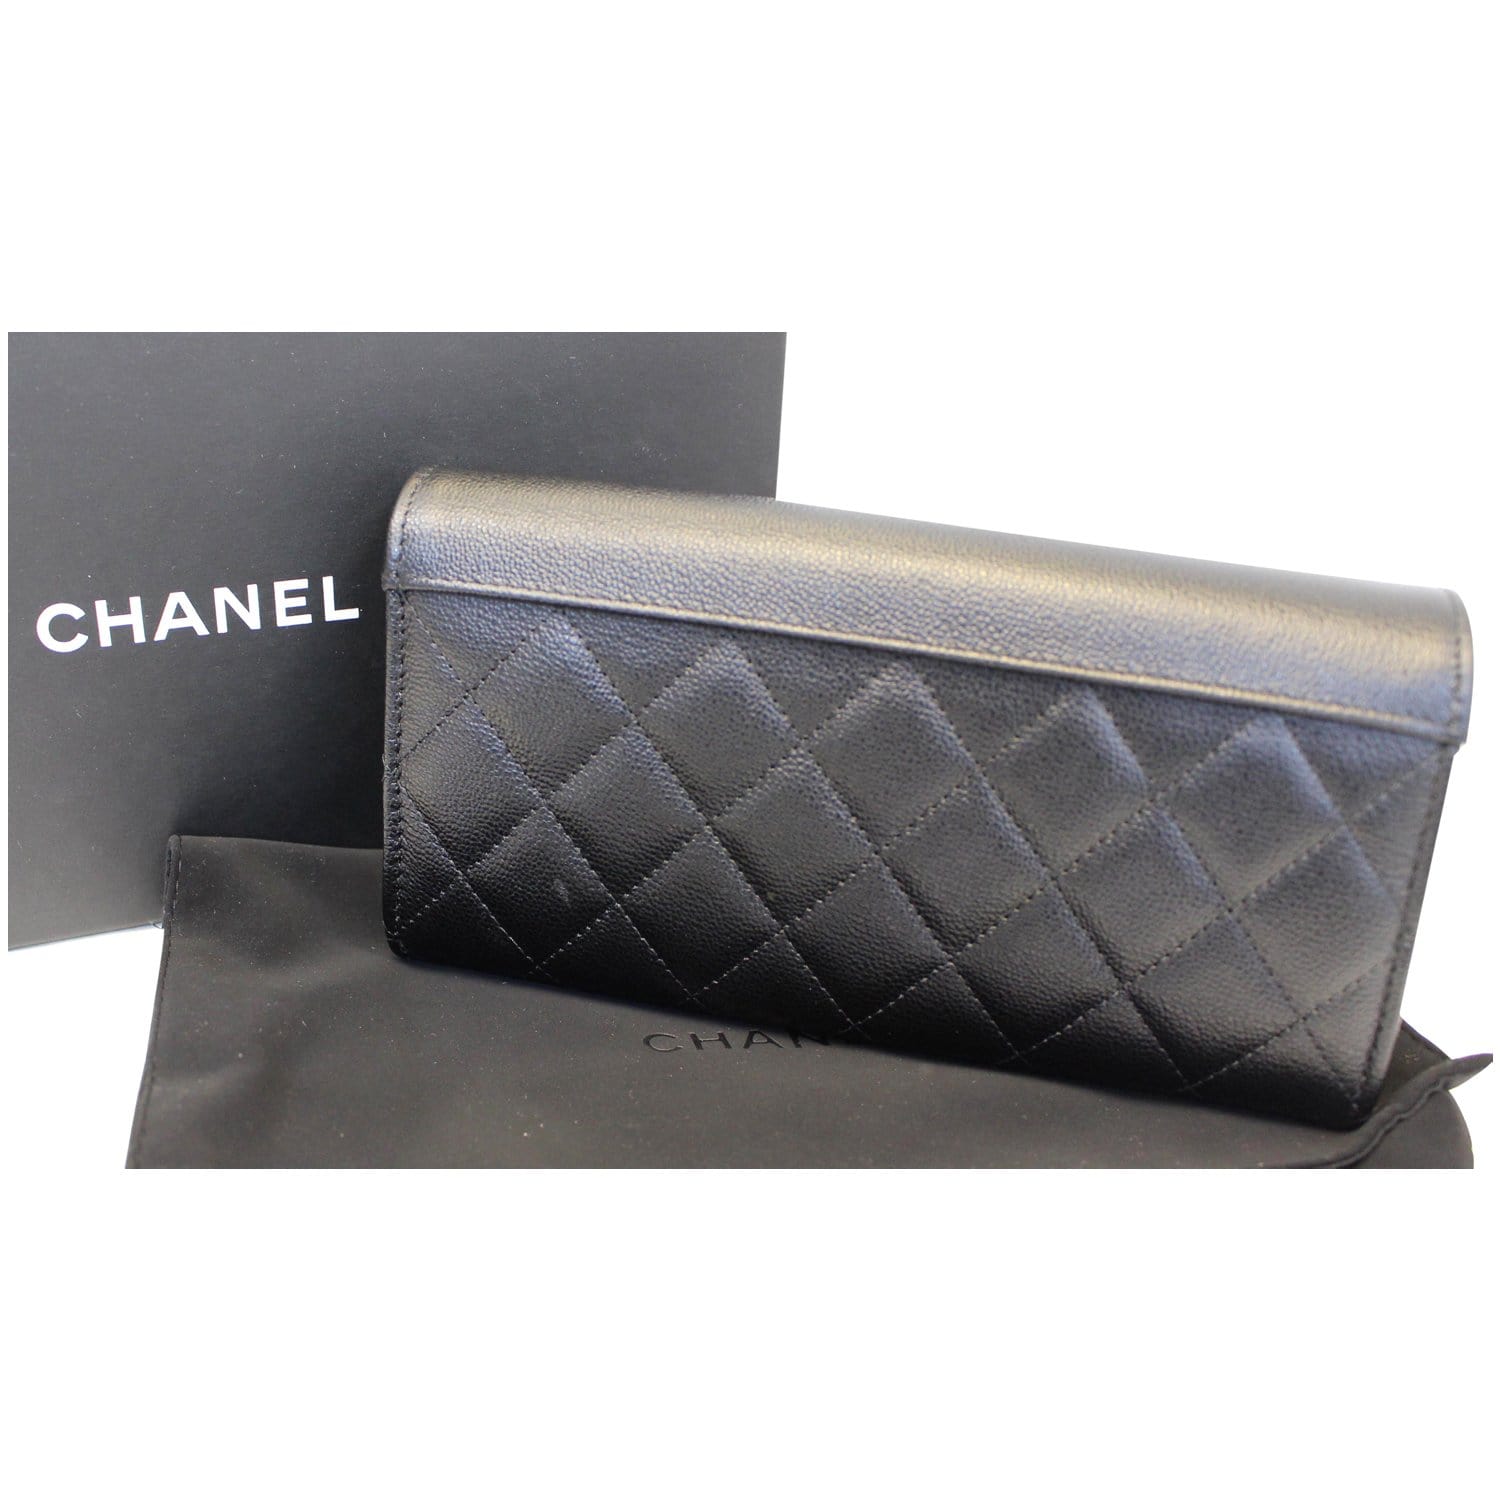 Lamb - ep_vintage luxury Store - A33814 – dct - Wallet - CHANEL